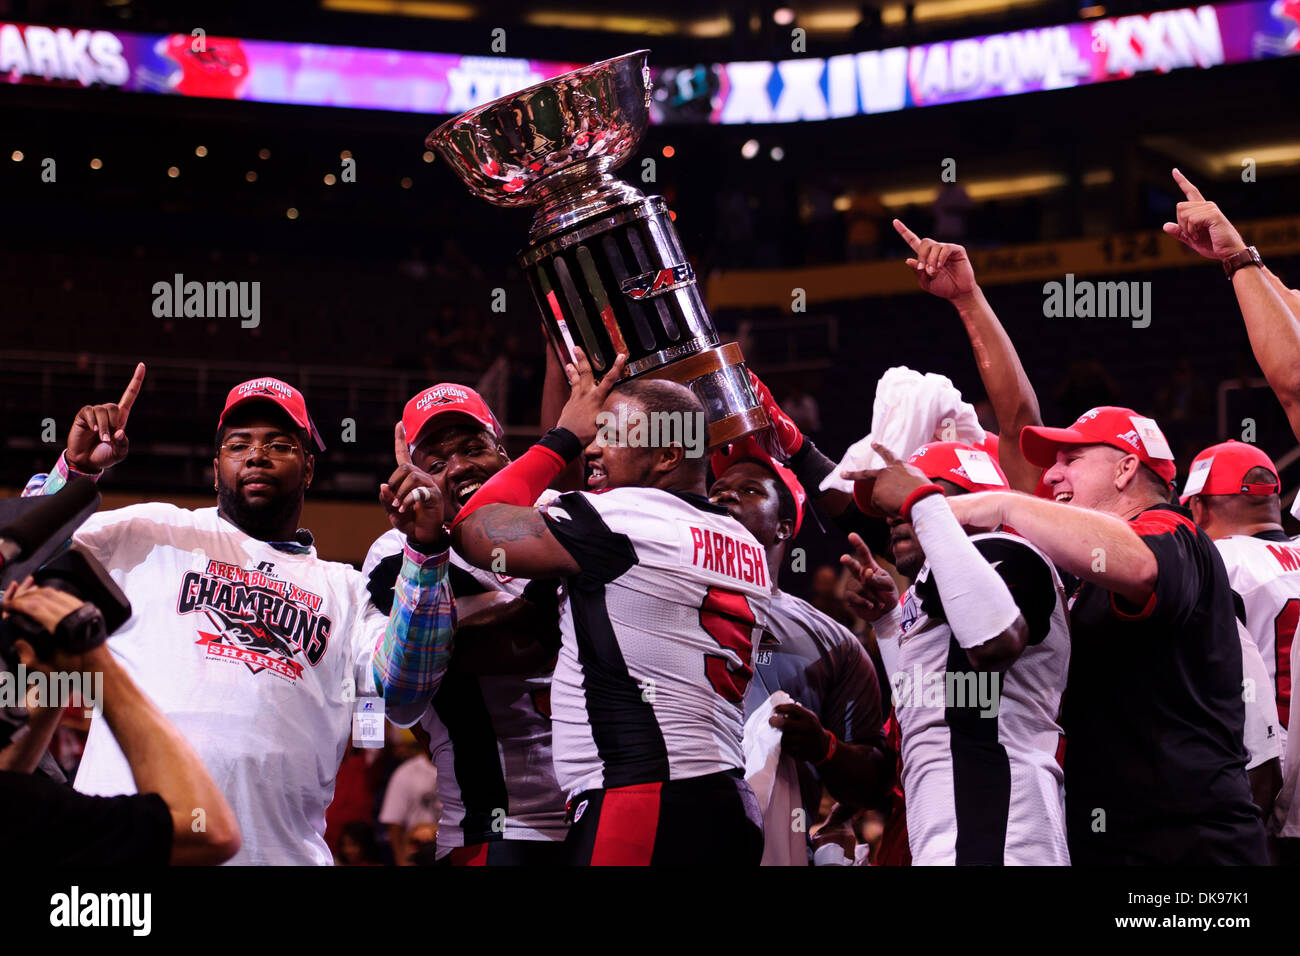 august 12, 2011: the jacksonville sharks hold up the afl trophy